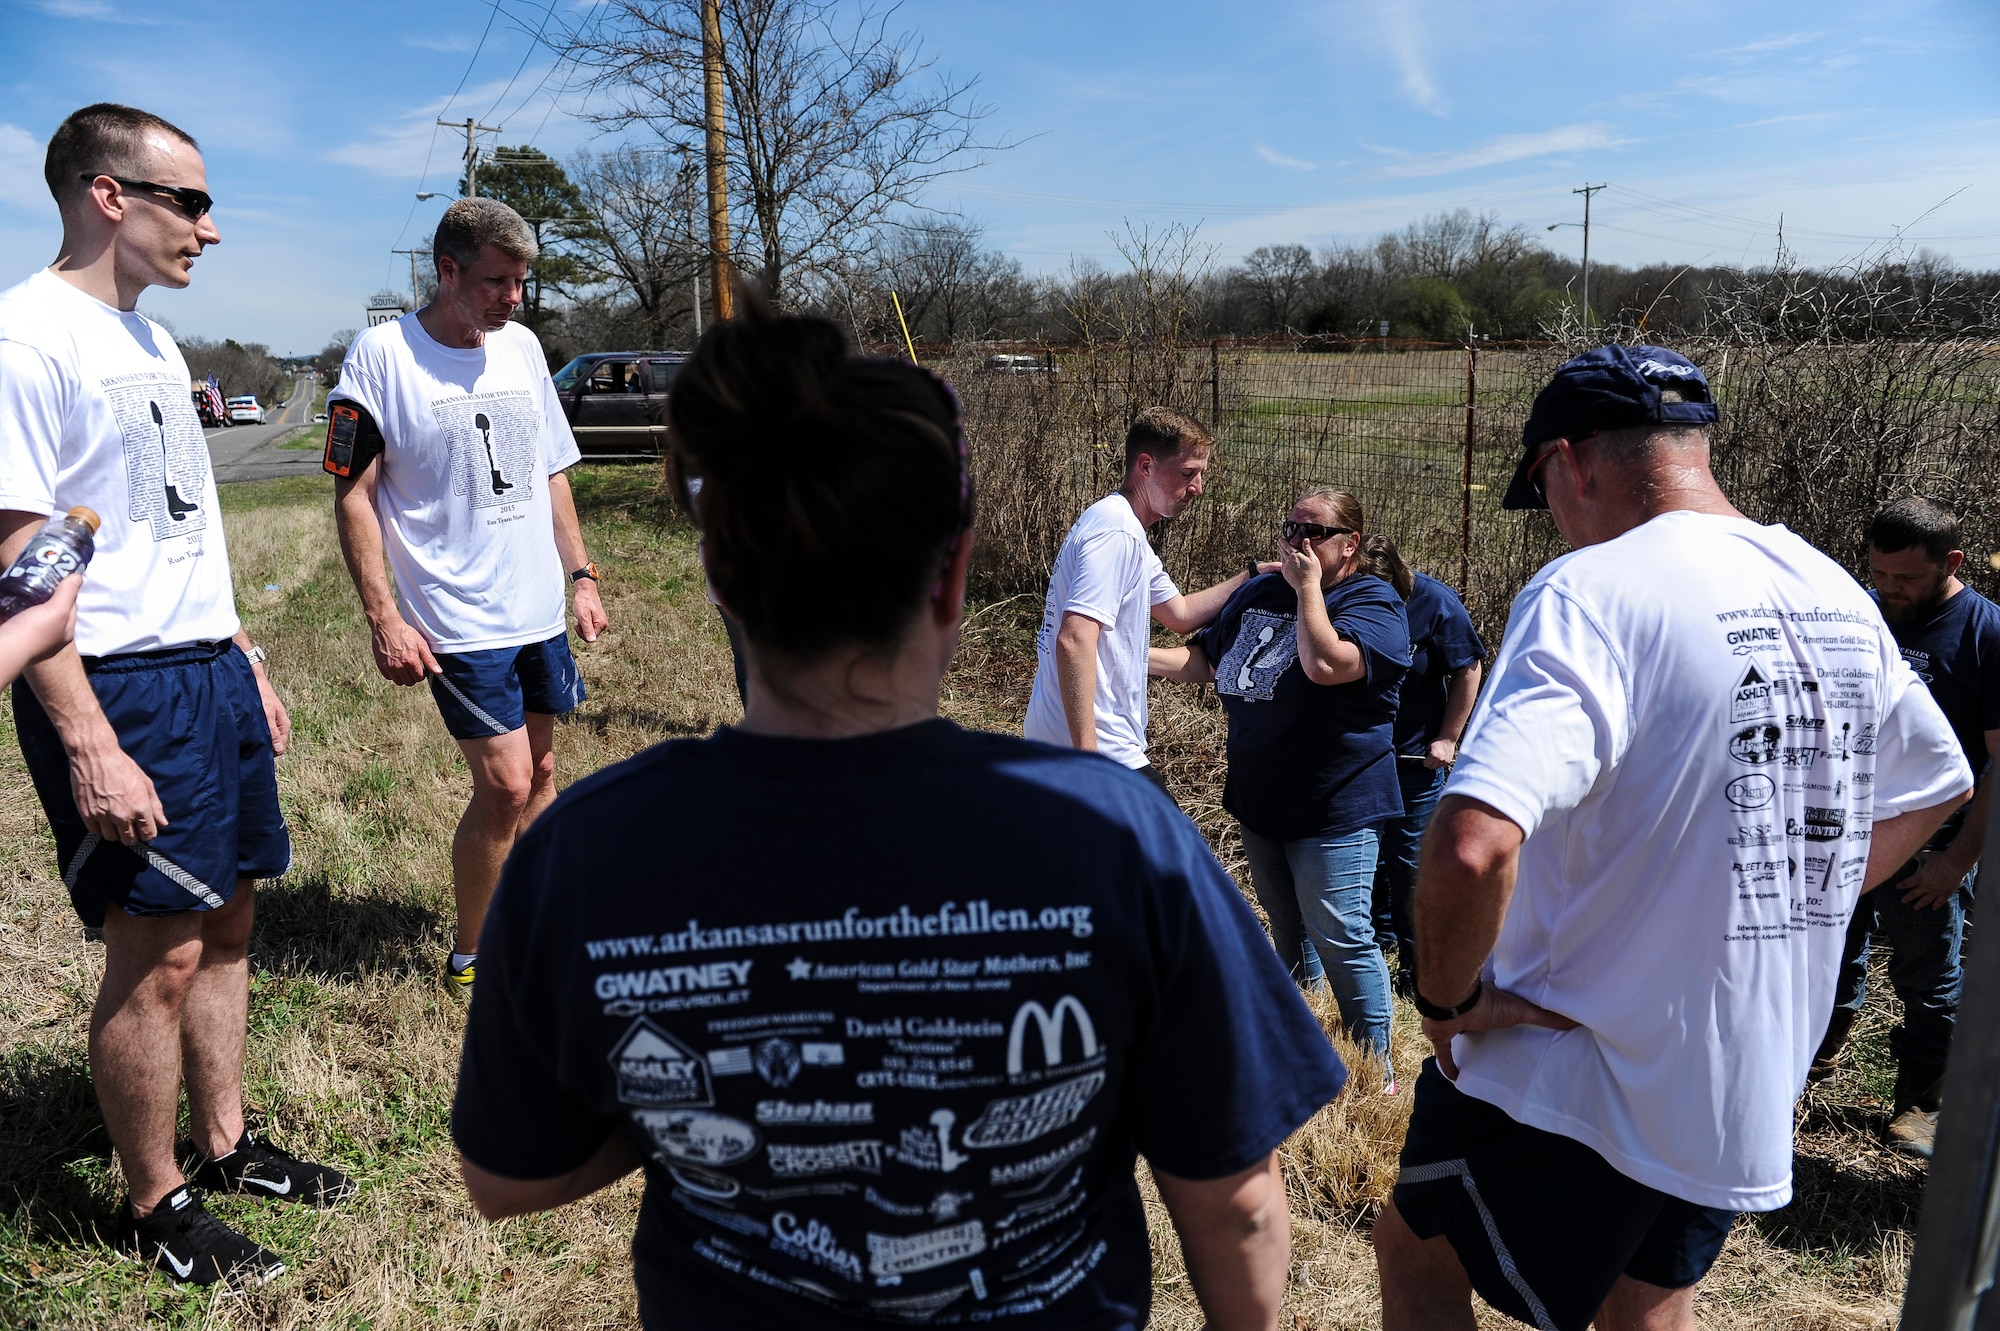 A gold-star mother is consoled by an Arkansas Run for the Fallen team member March 20, 2015, outside of Clarksville, Ark., March 20, 2015. Every mile, for 146 miles, a member of the running group read the biography card, placed it in the ground at the designated memorial site for the fallen service member and rendered a salute. (U.S. Air Force photo/Senior Airman Cliffton Dolezal)